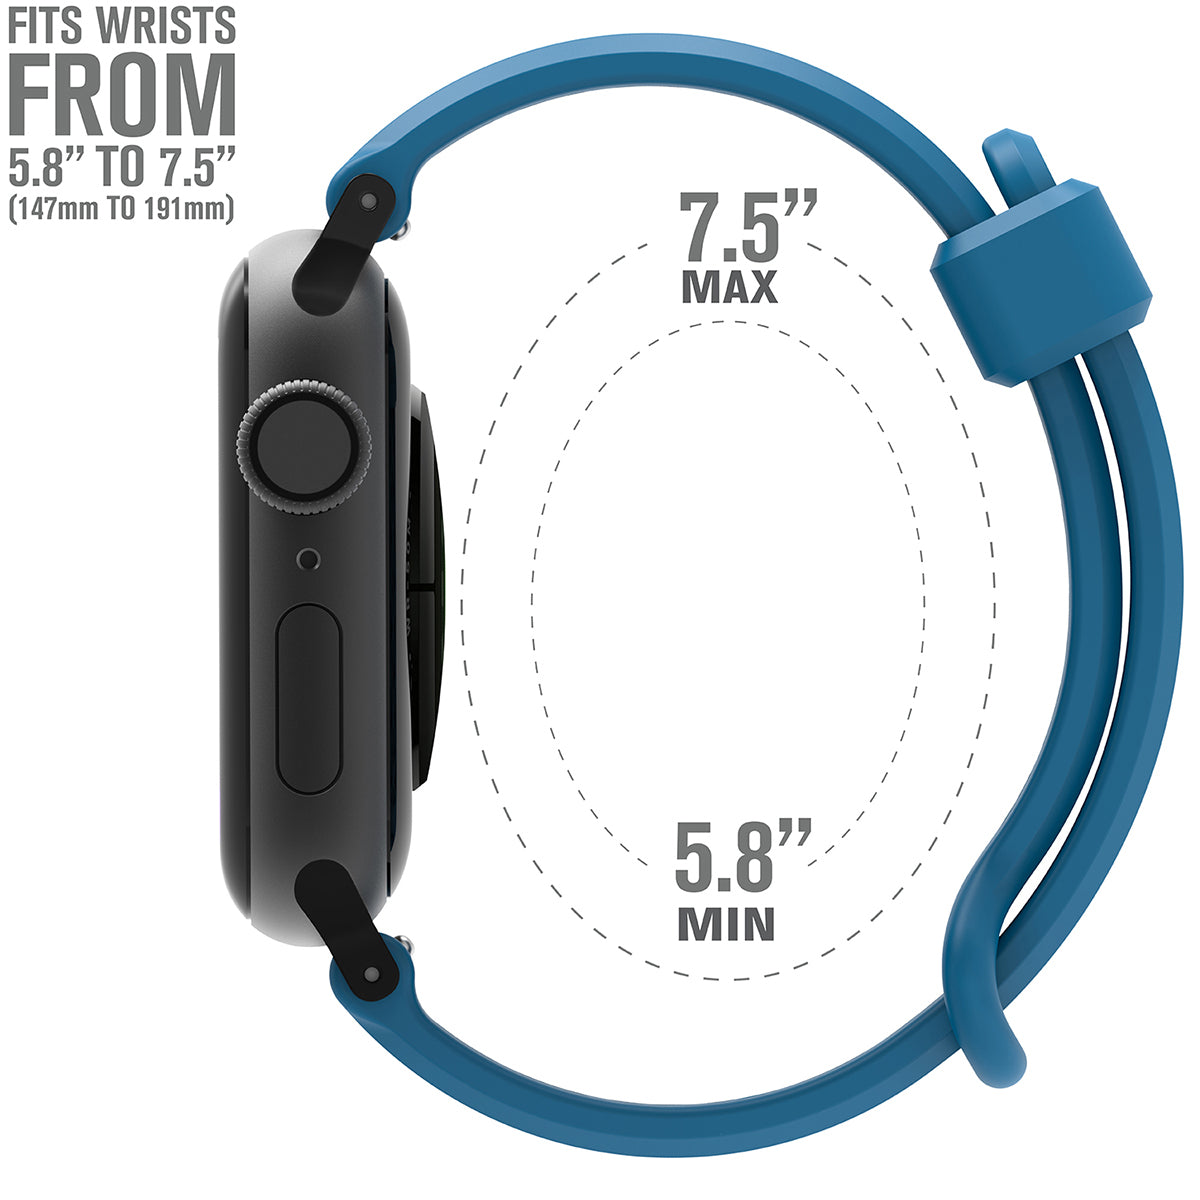 catalyst apple watch series 9 8 7 6 5 4 se gen 2 1 38 40 41mm sports band with apple connector side of apple watch with the minimum and maximum sizes of the sport band blueridge text reads fits wrists from 5.8" to 7.5"(147mm to 191mm)